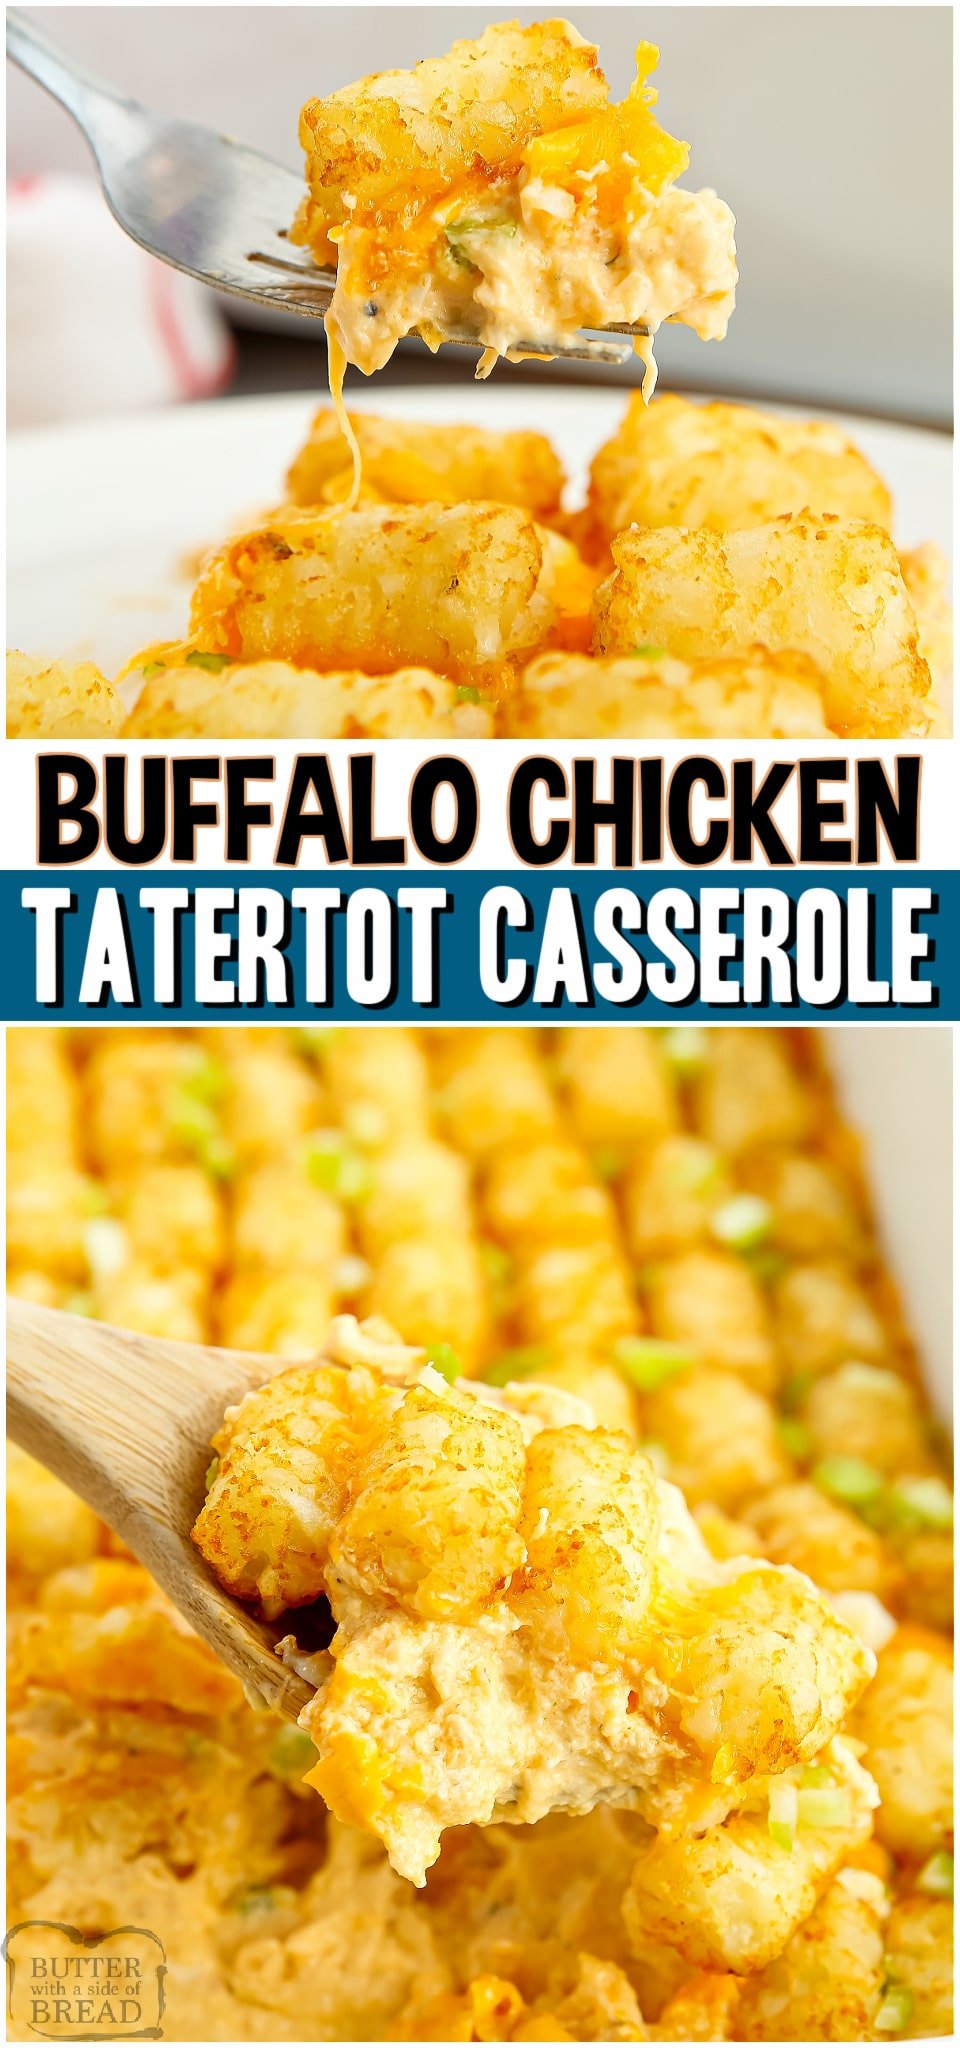 We took our favorite Tater Tot Casserole and added a Buffalo Chicken twist! Made with buffalo wing sauce, chicken, cheese & tater tots, this dinner's packed with creamy, cheesy flavor! #chicken #tatertot #casserole #buffalo #dinner #easyrecipe from BUTTER WITH A SIDE OF BREAD